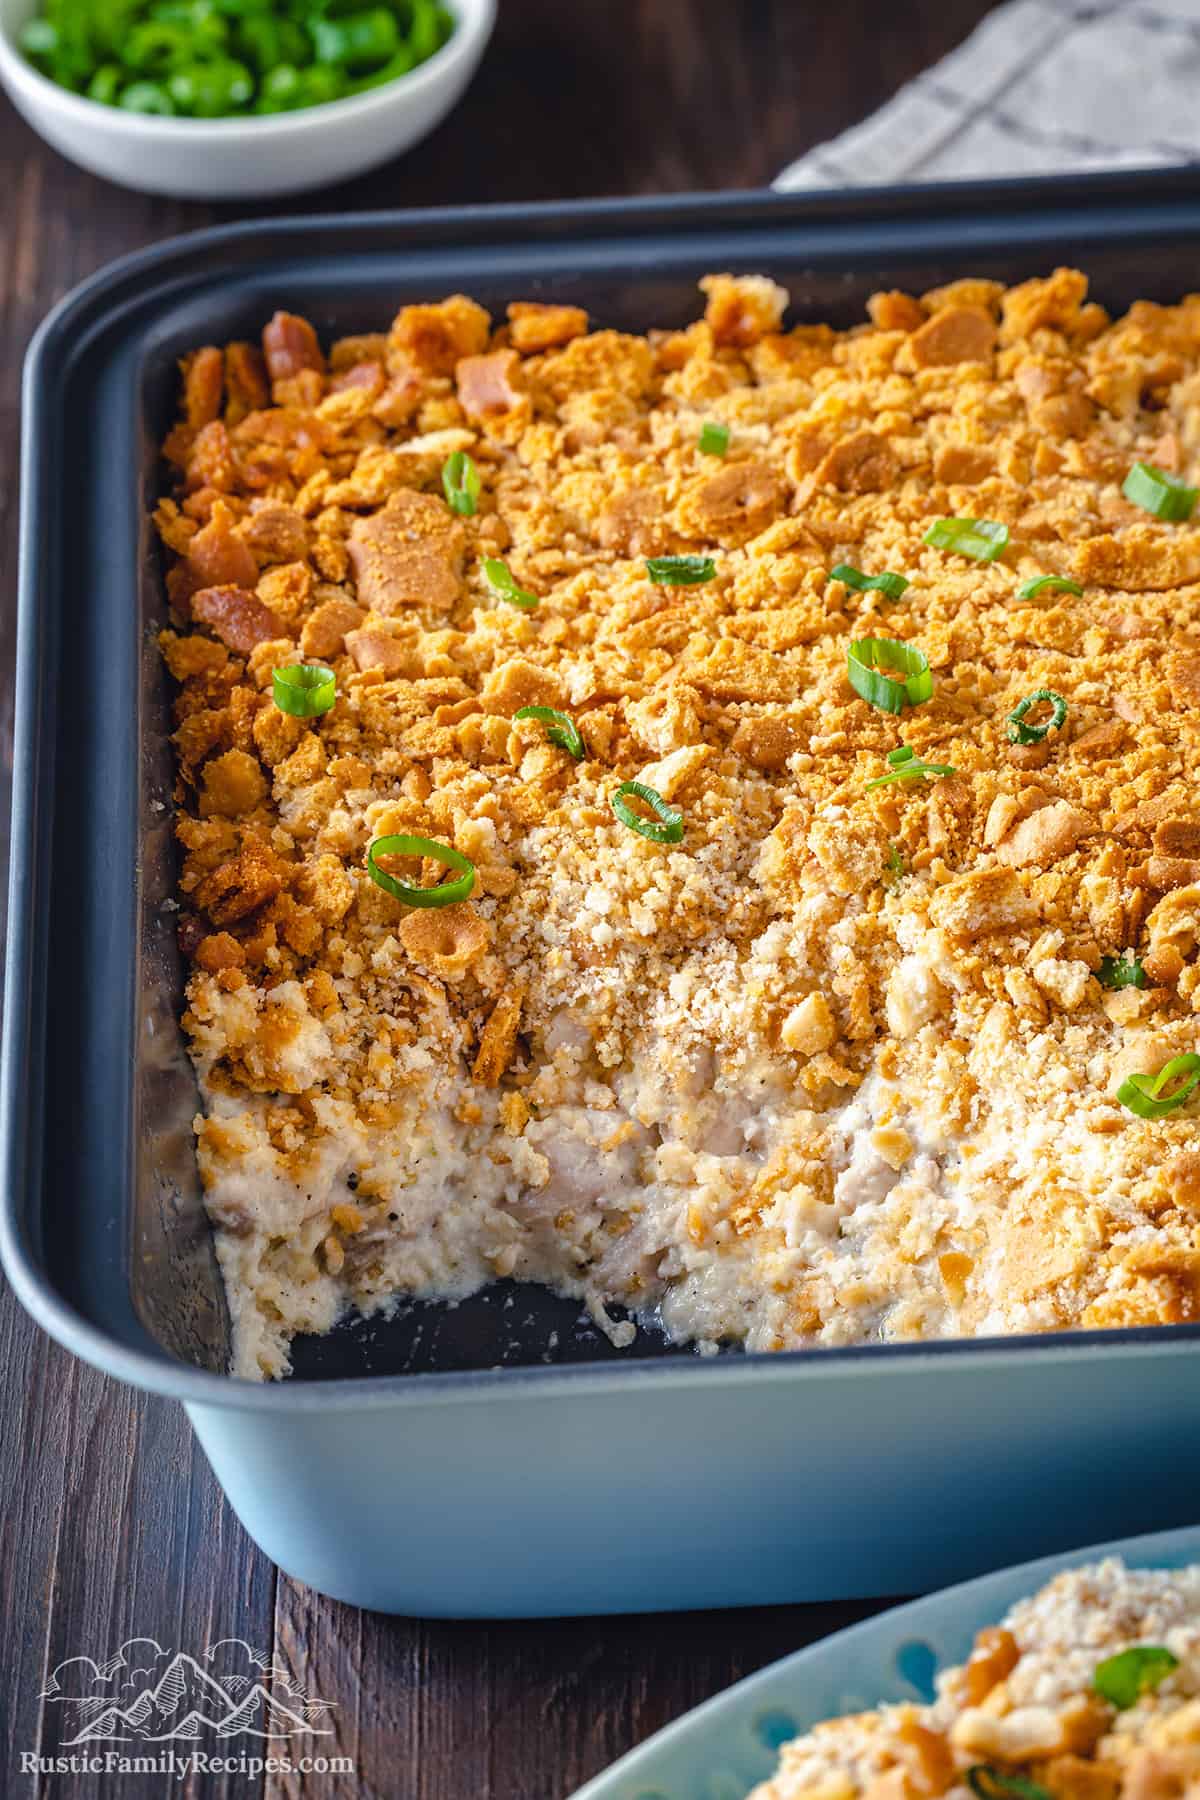 Million dollar chicken casserole in a blue baking dish with a slice taken out